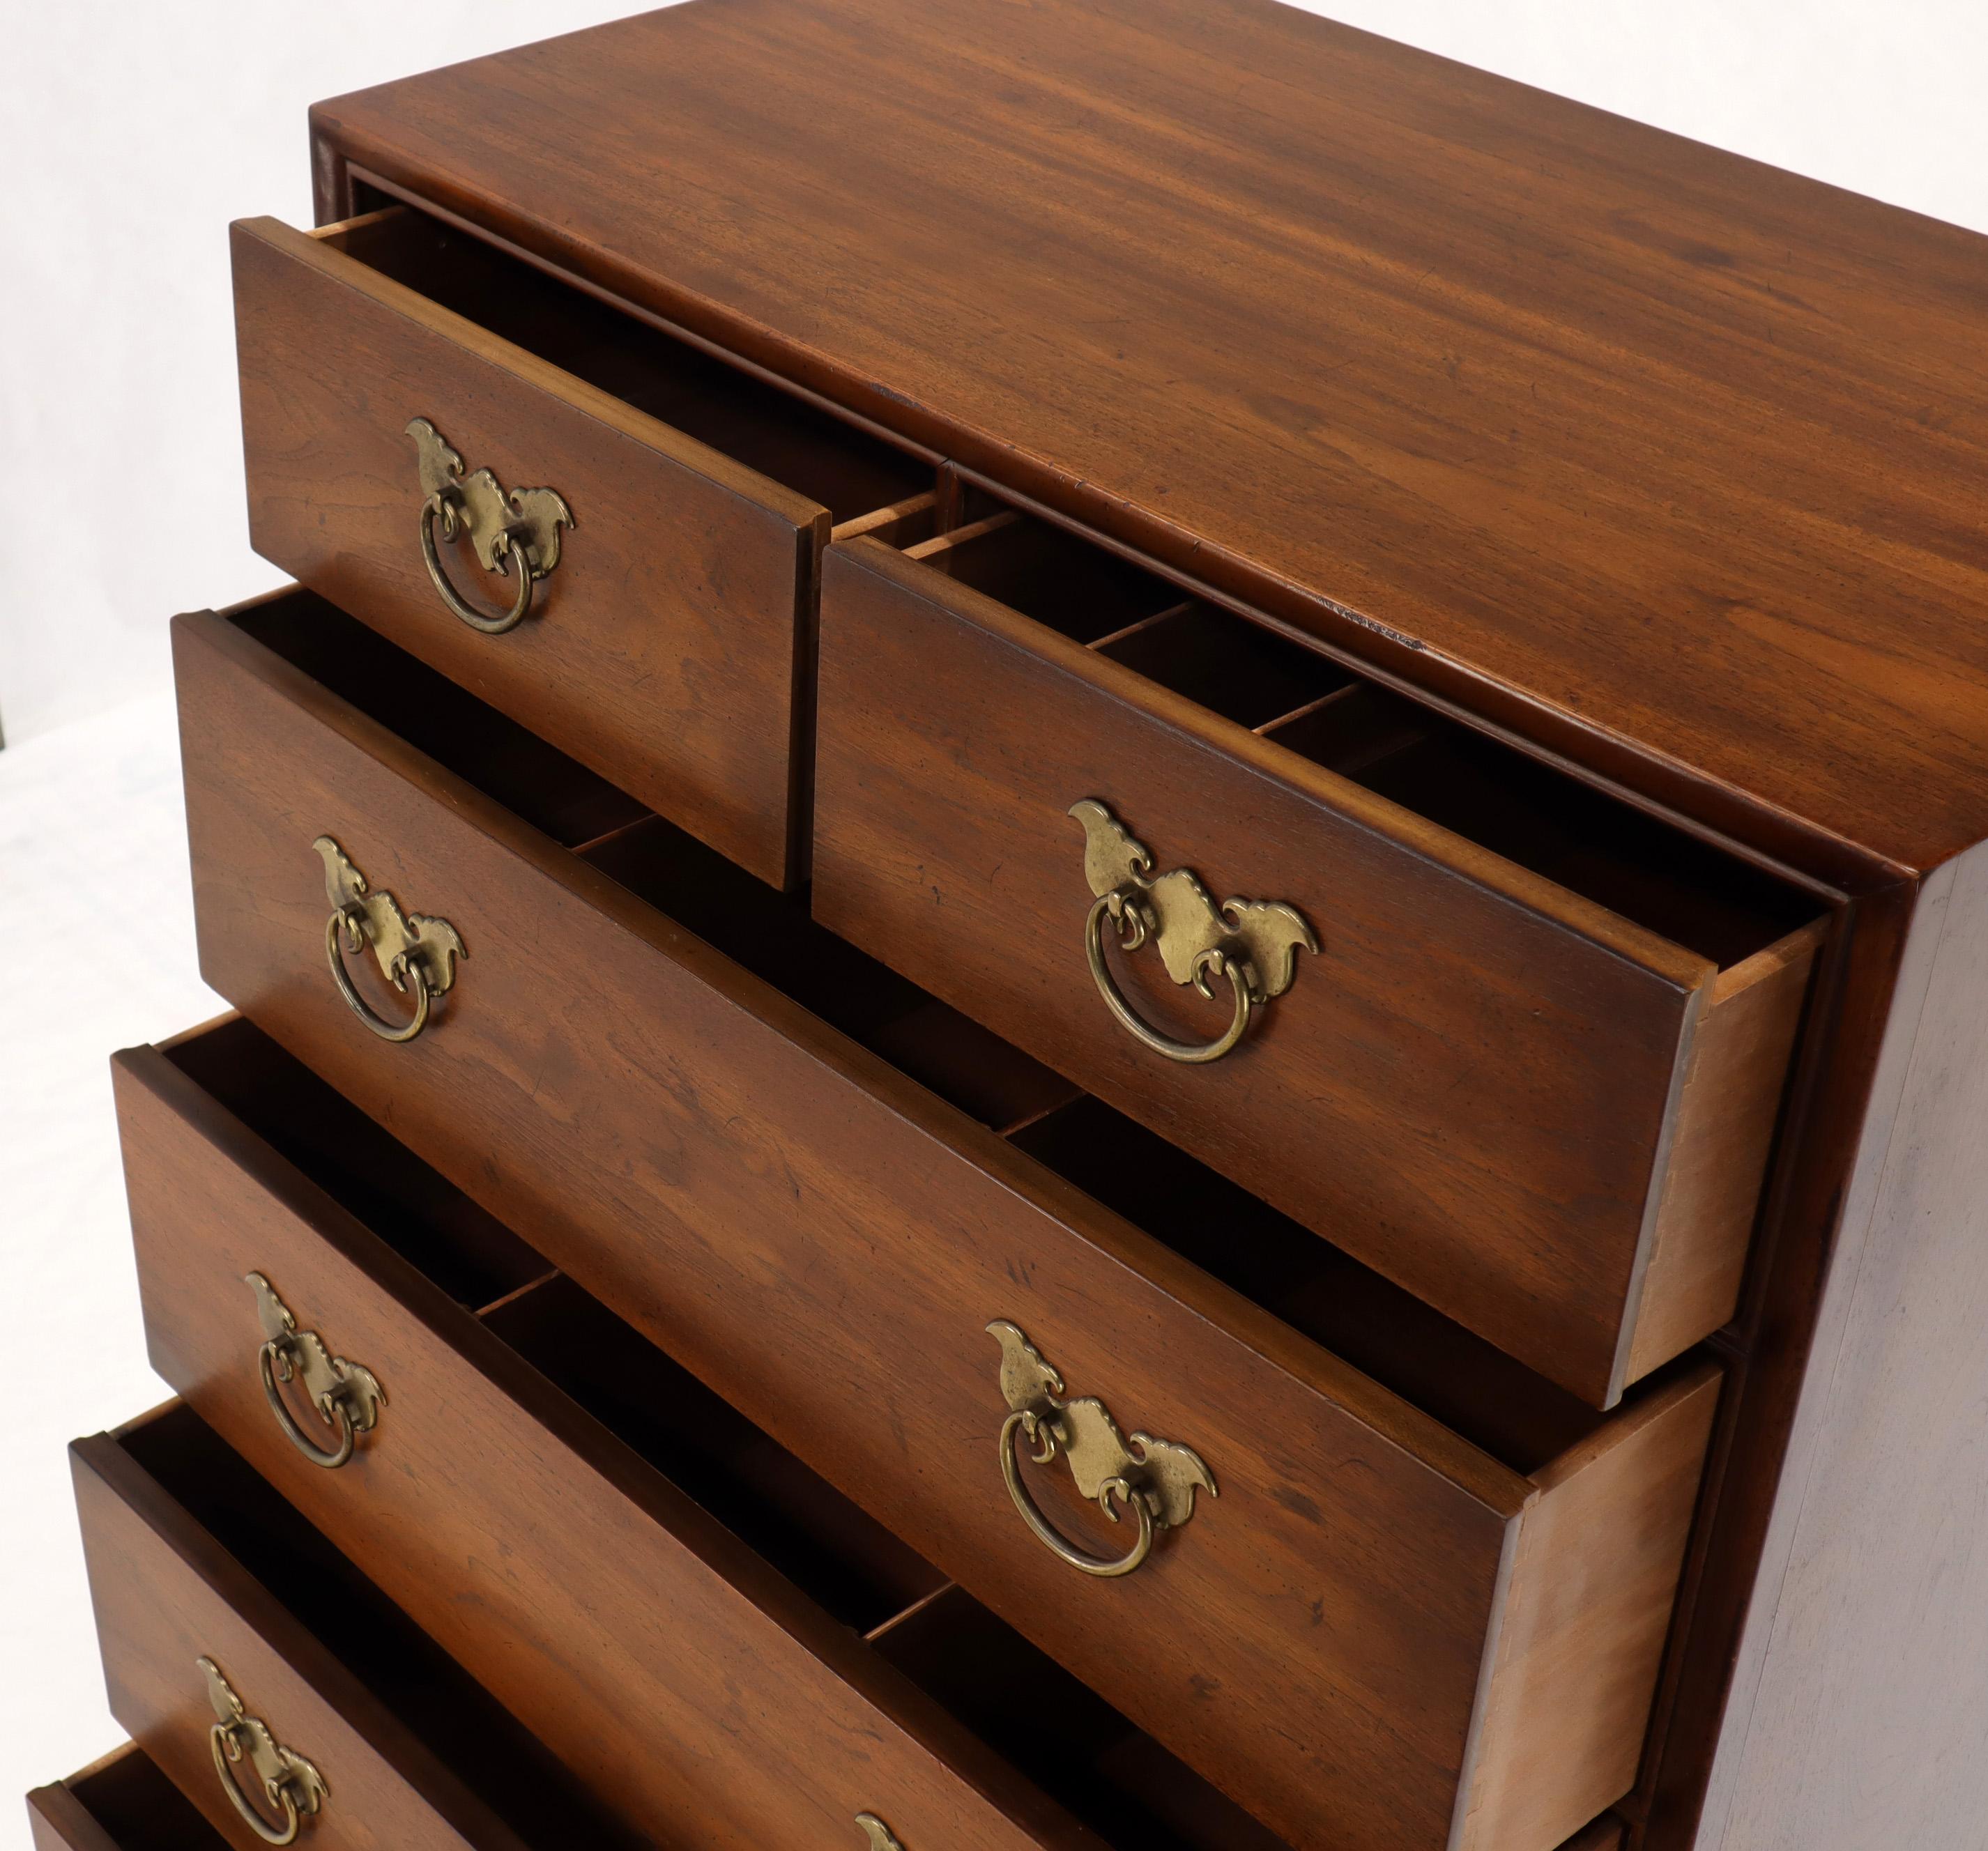 Mid-Century Modern six drawers high chest dresser with decorative horse shoe shape pulls by Henredon. Nice oak construction deep and functional drawers.